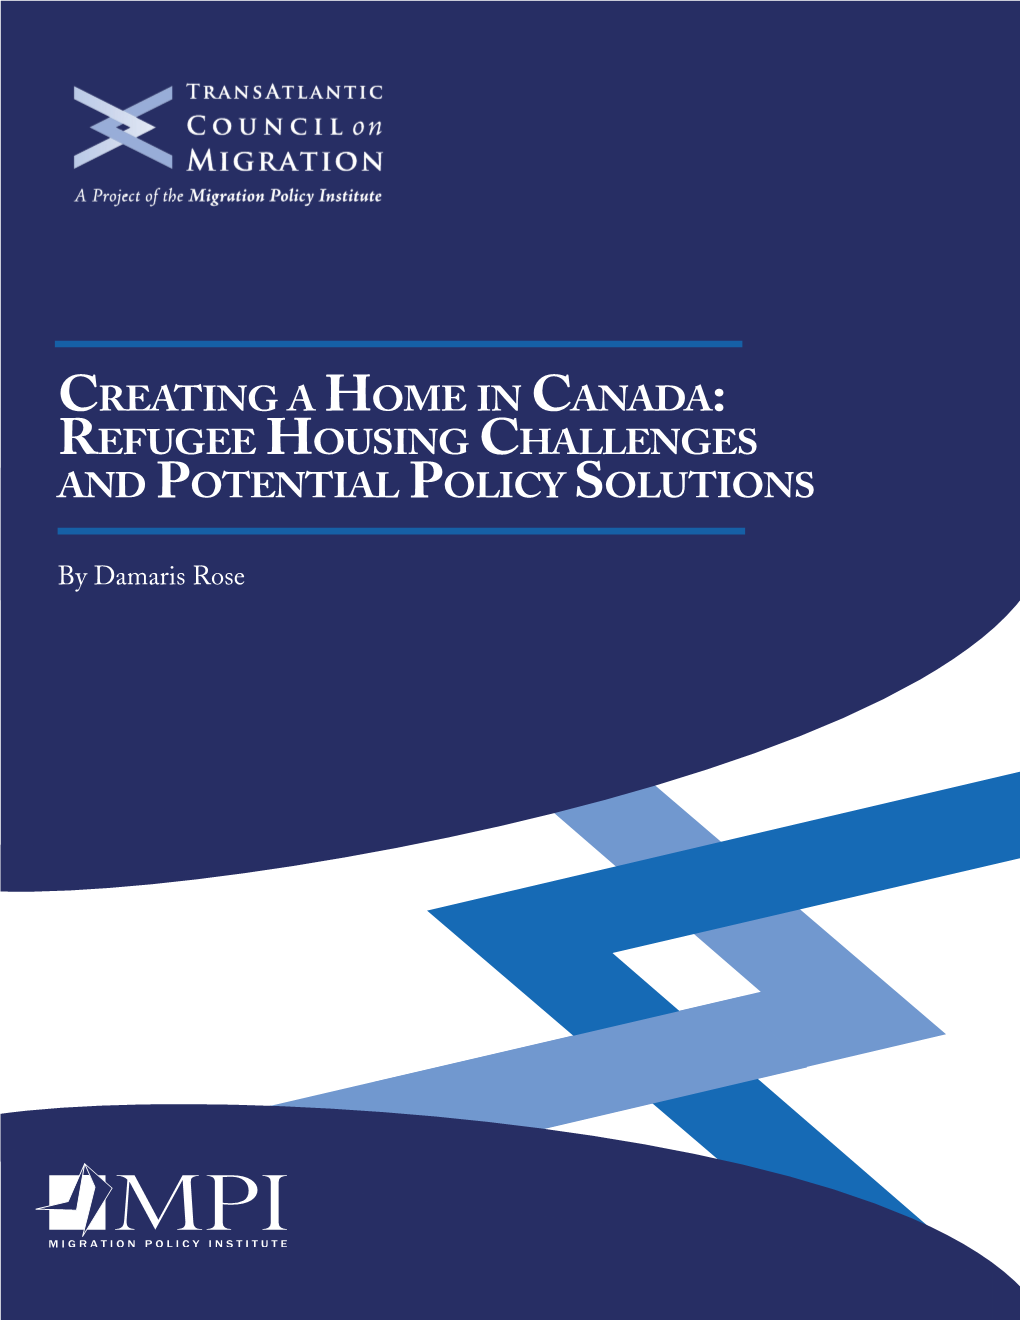 Creating a Home in Canada: Refugee Housing Challenges and Potential Policy Solutions